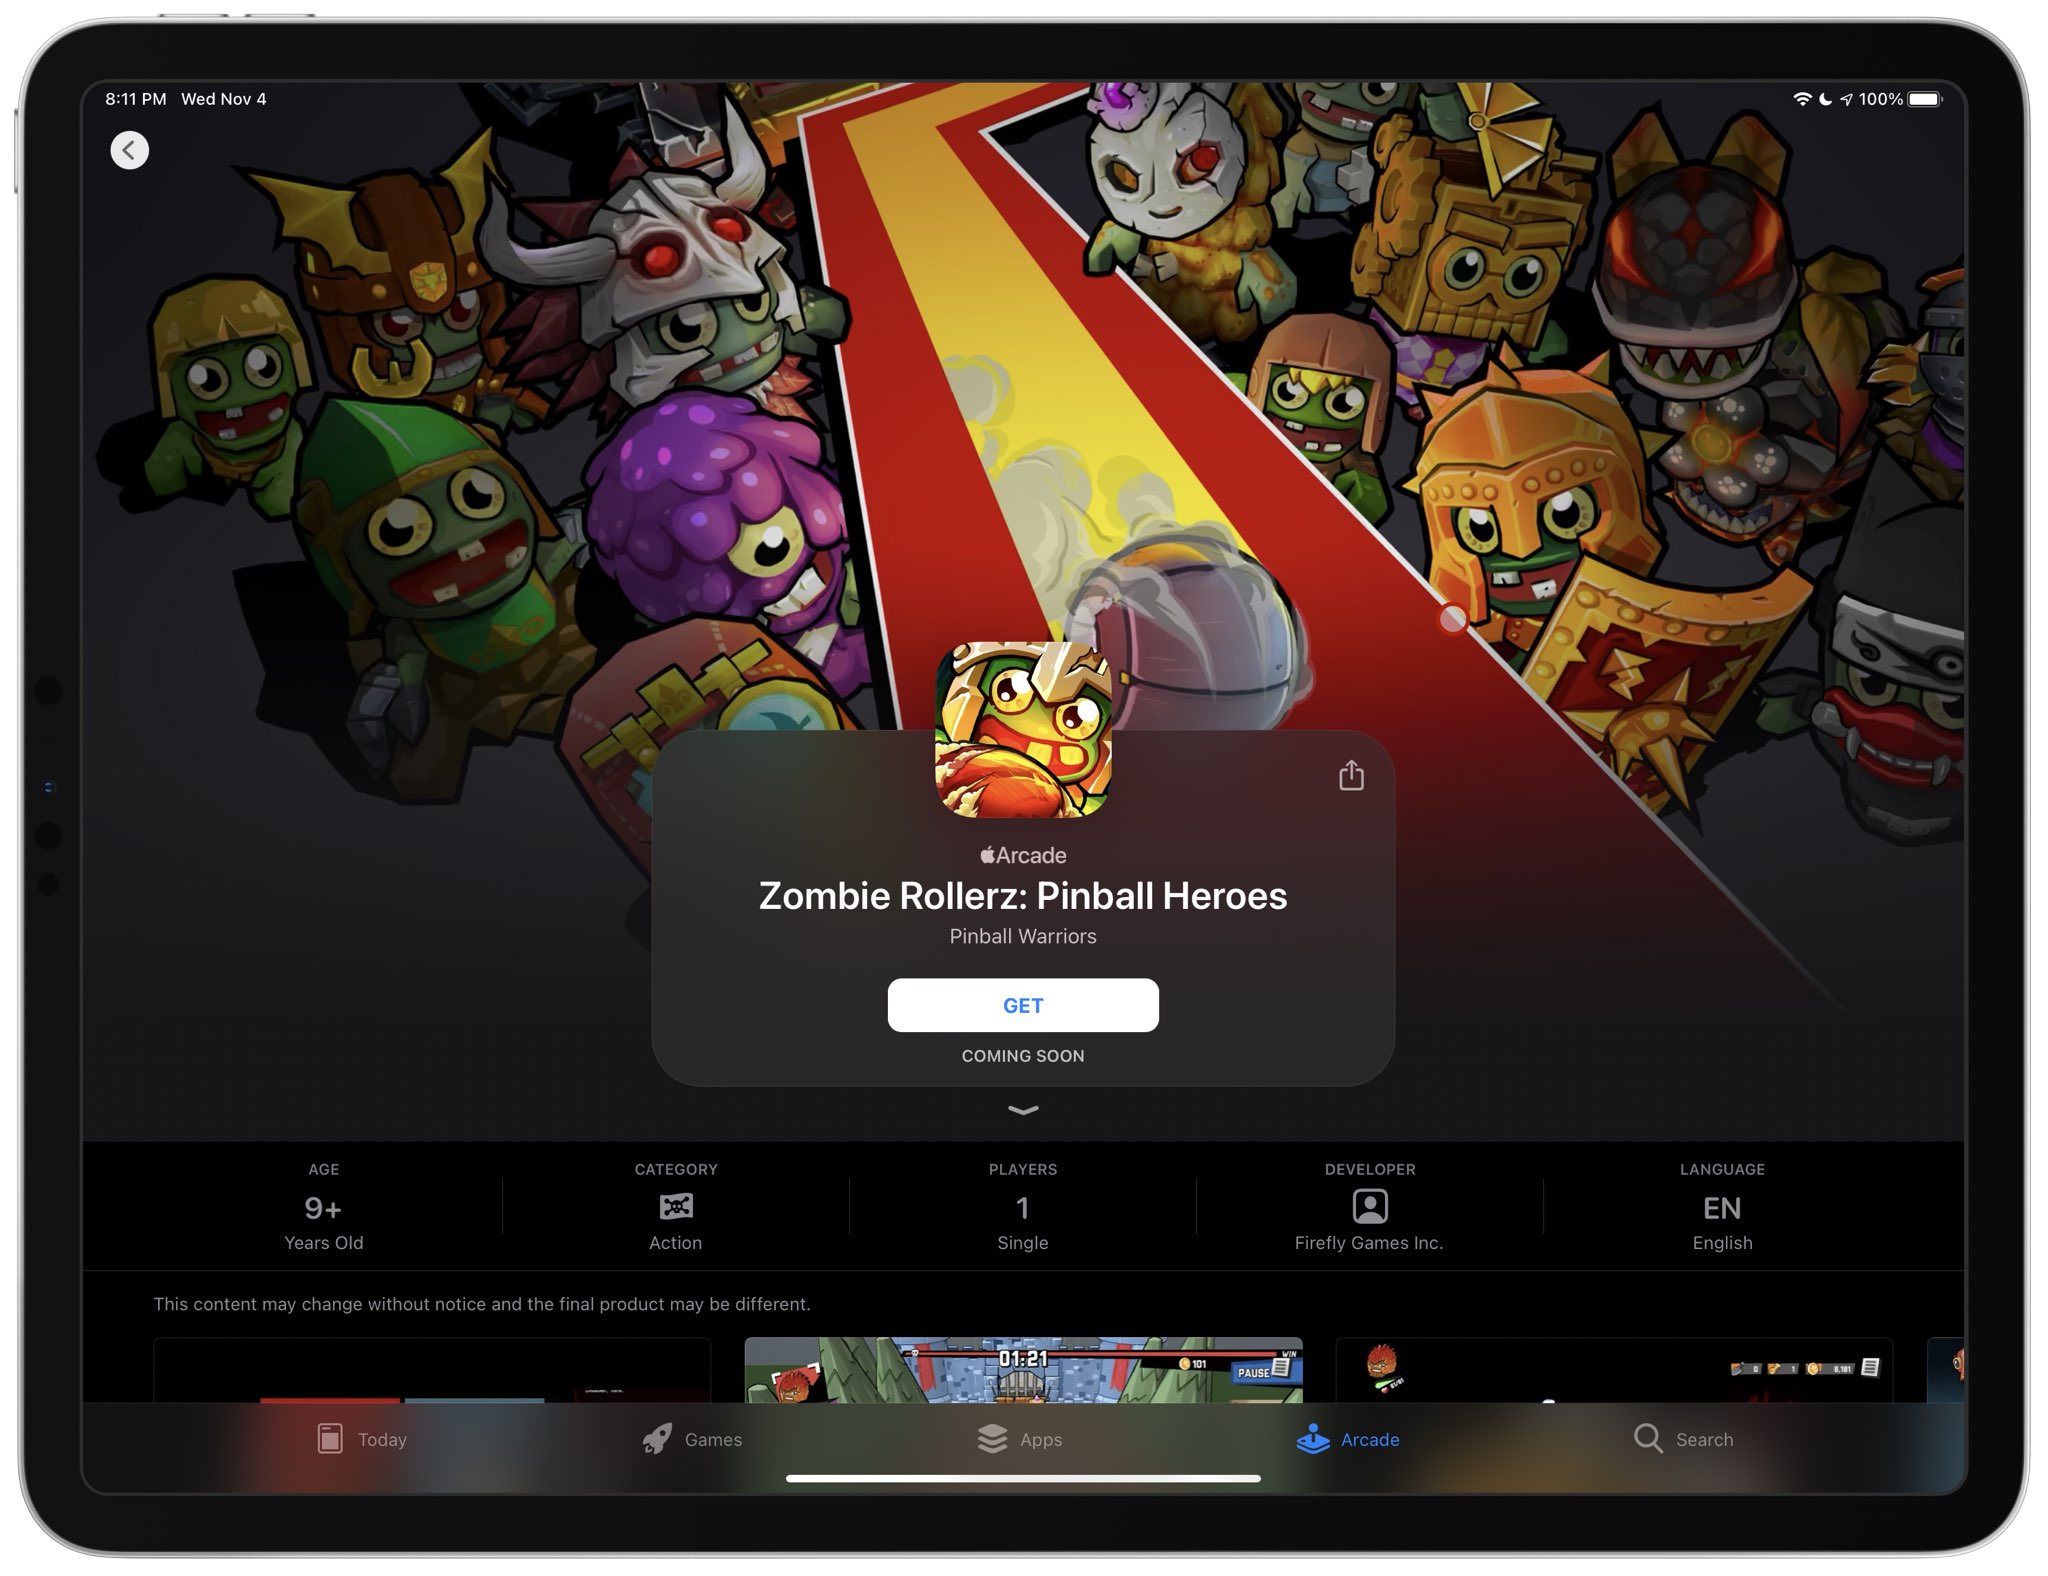 “Zombie Rollerz: Pinball Heroes” is yet another coming-soon Apple Arcade title